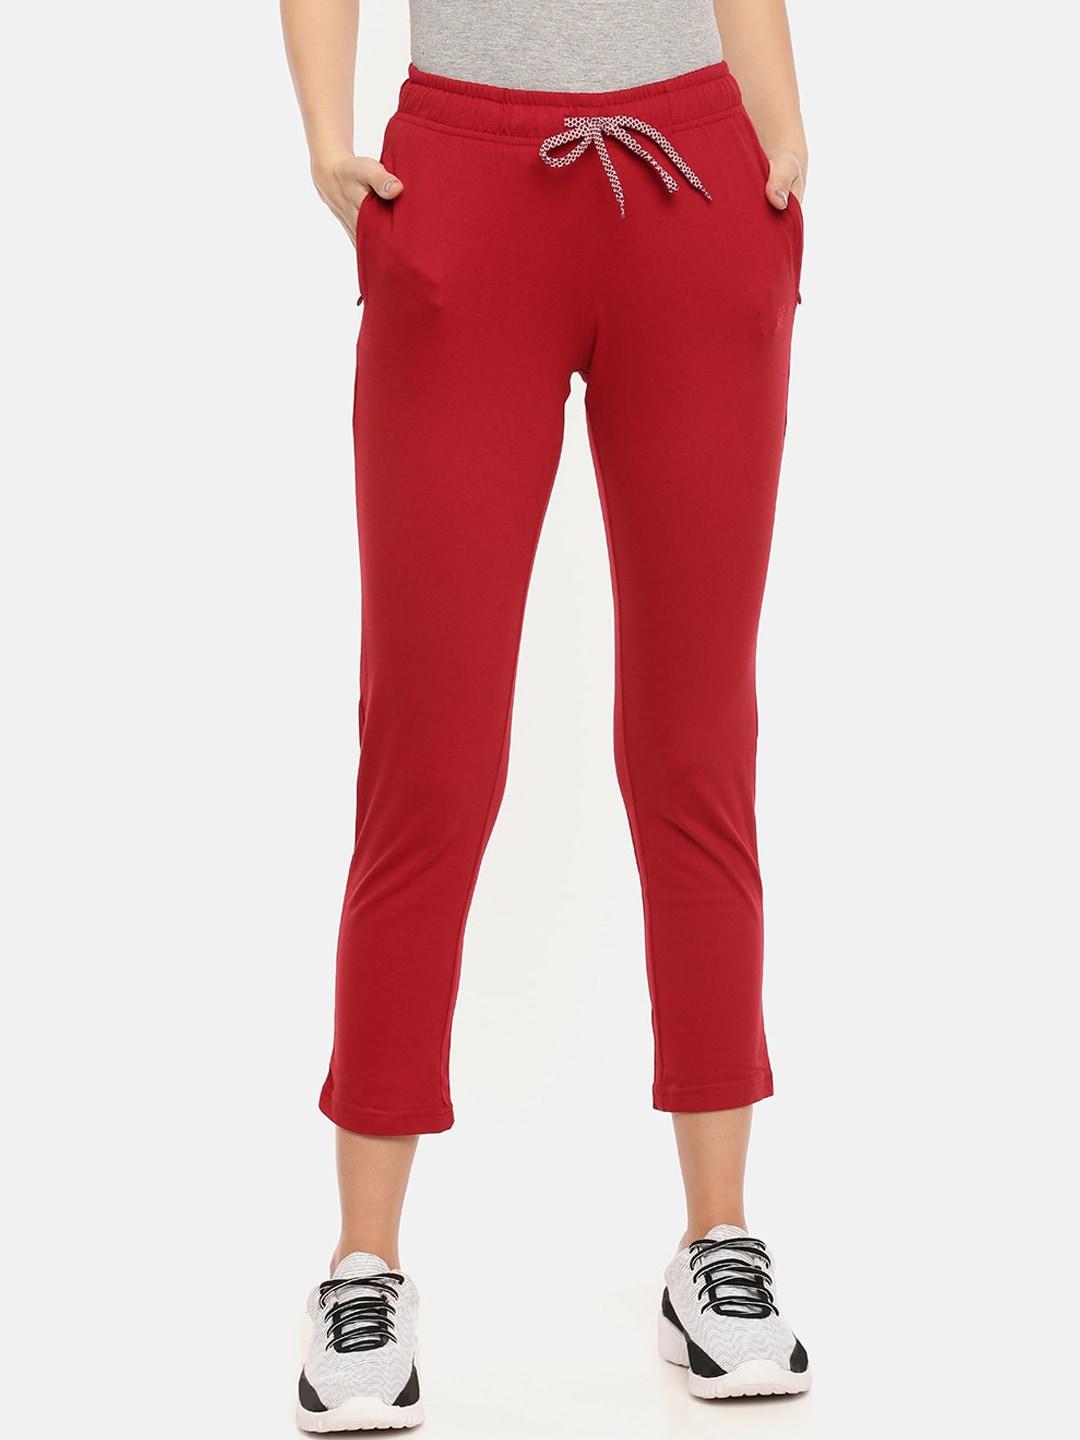 dollar-missy-women-red-solid-track-pants